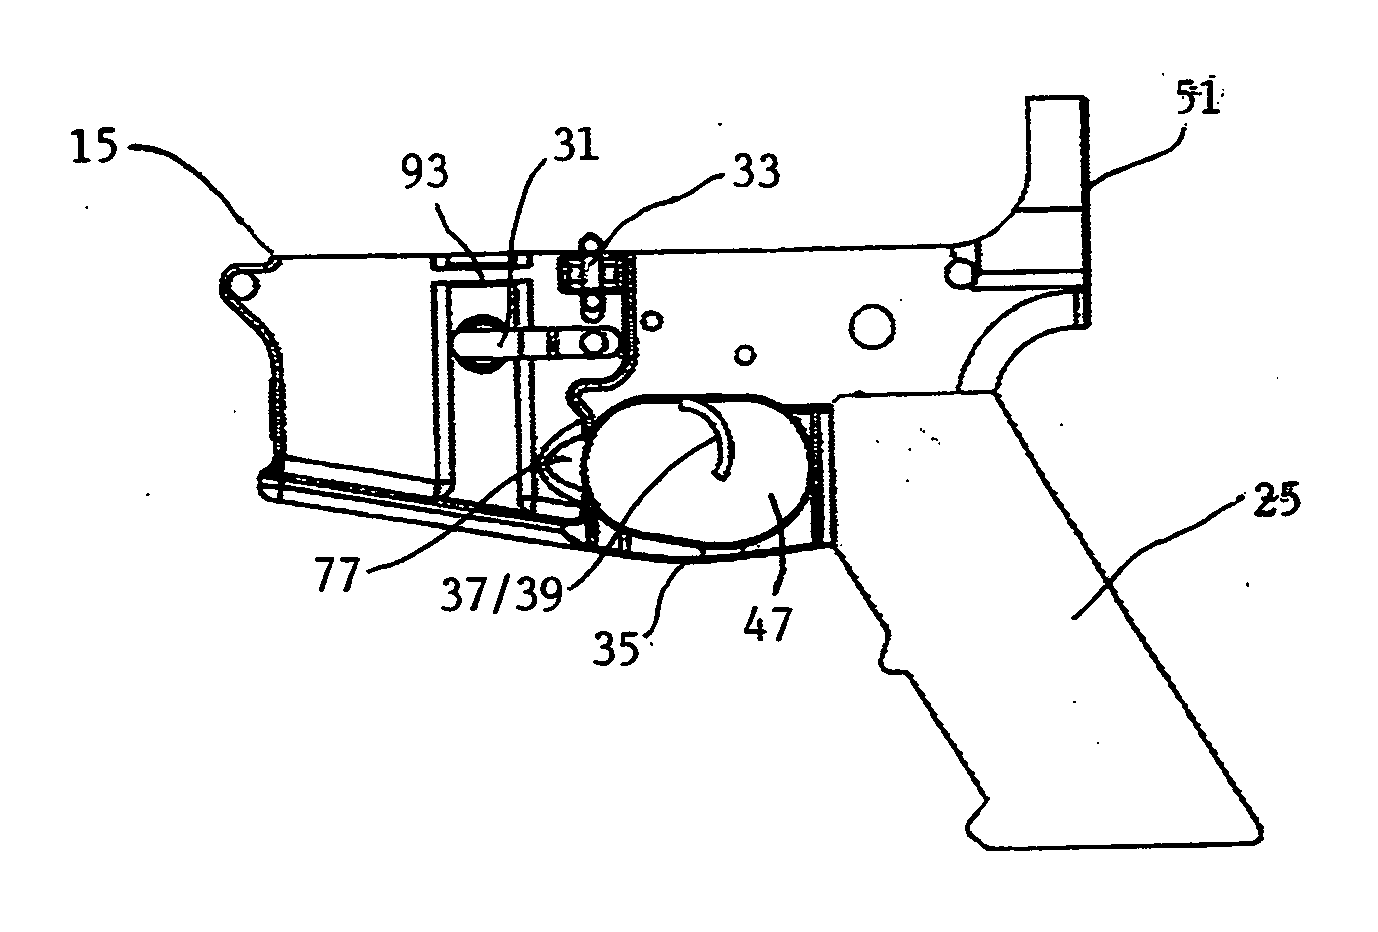 Lower receiver for firearms